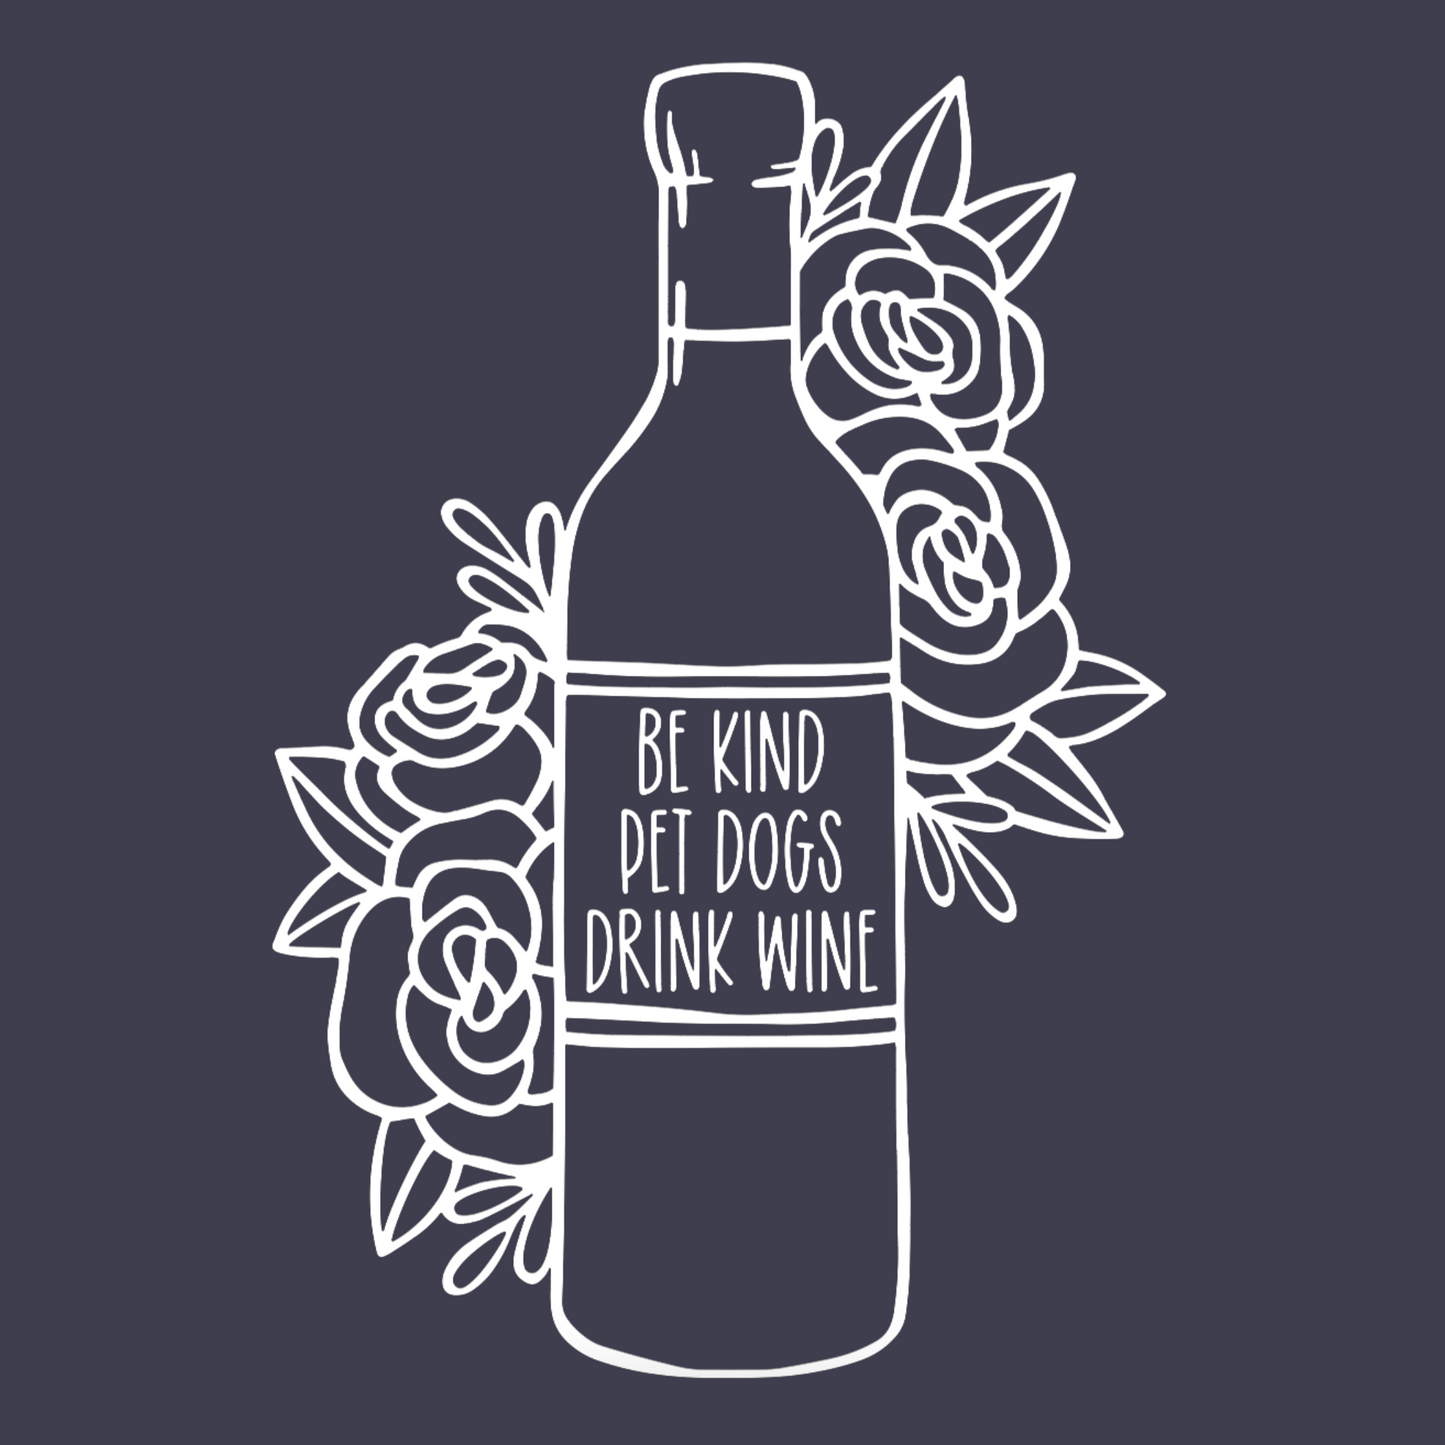 Be Kind, Pet Dogs, Drink Wine - T-Shirt on a navy shirt with white design. The design is an outline of a wine bottle with a variety of flowers and vines sketched beside the bottle, with the saying "be kind, pet dogs, drink wine" inside the wine label. This is an image of just the design on a navy blue background.